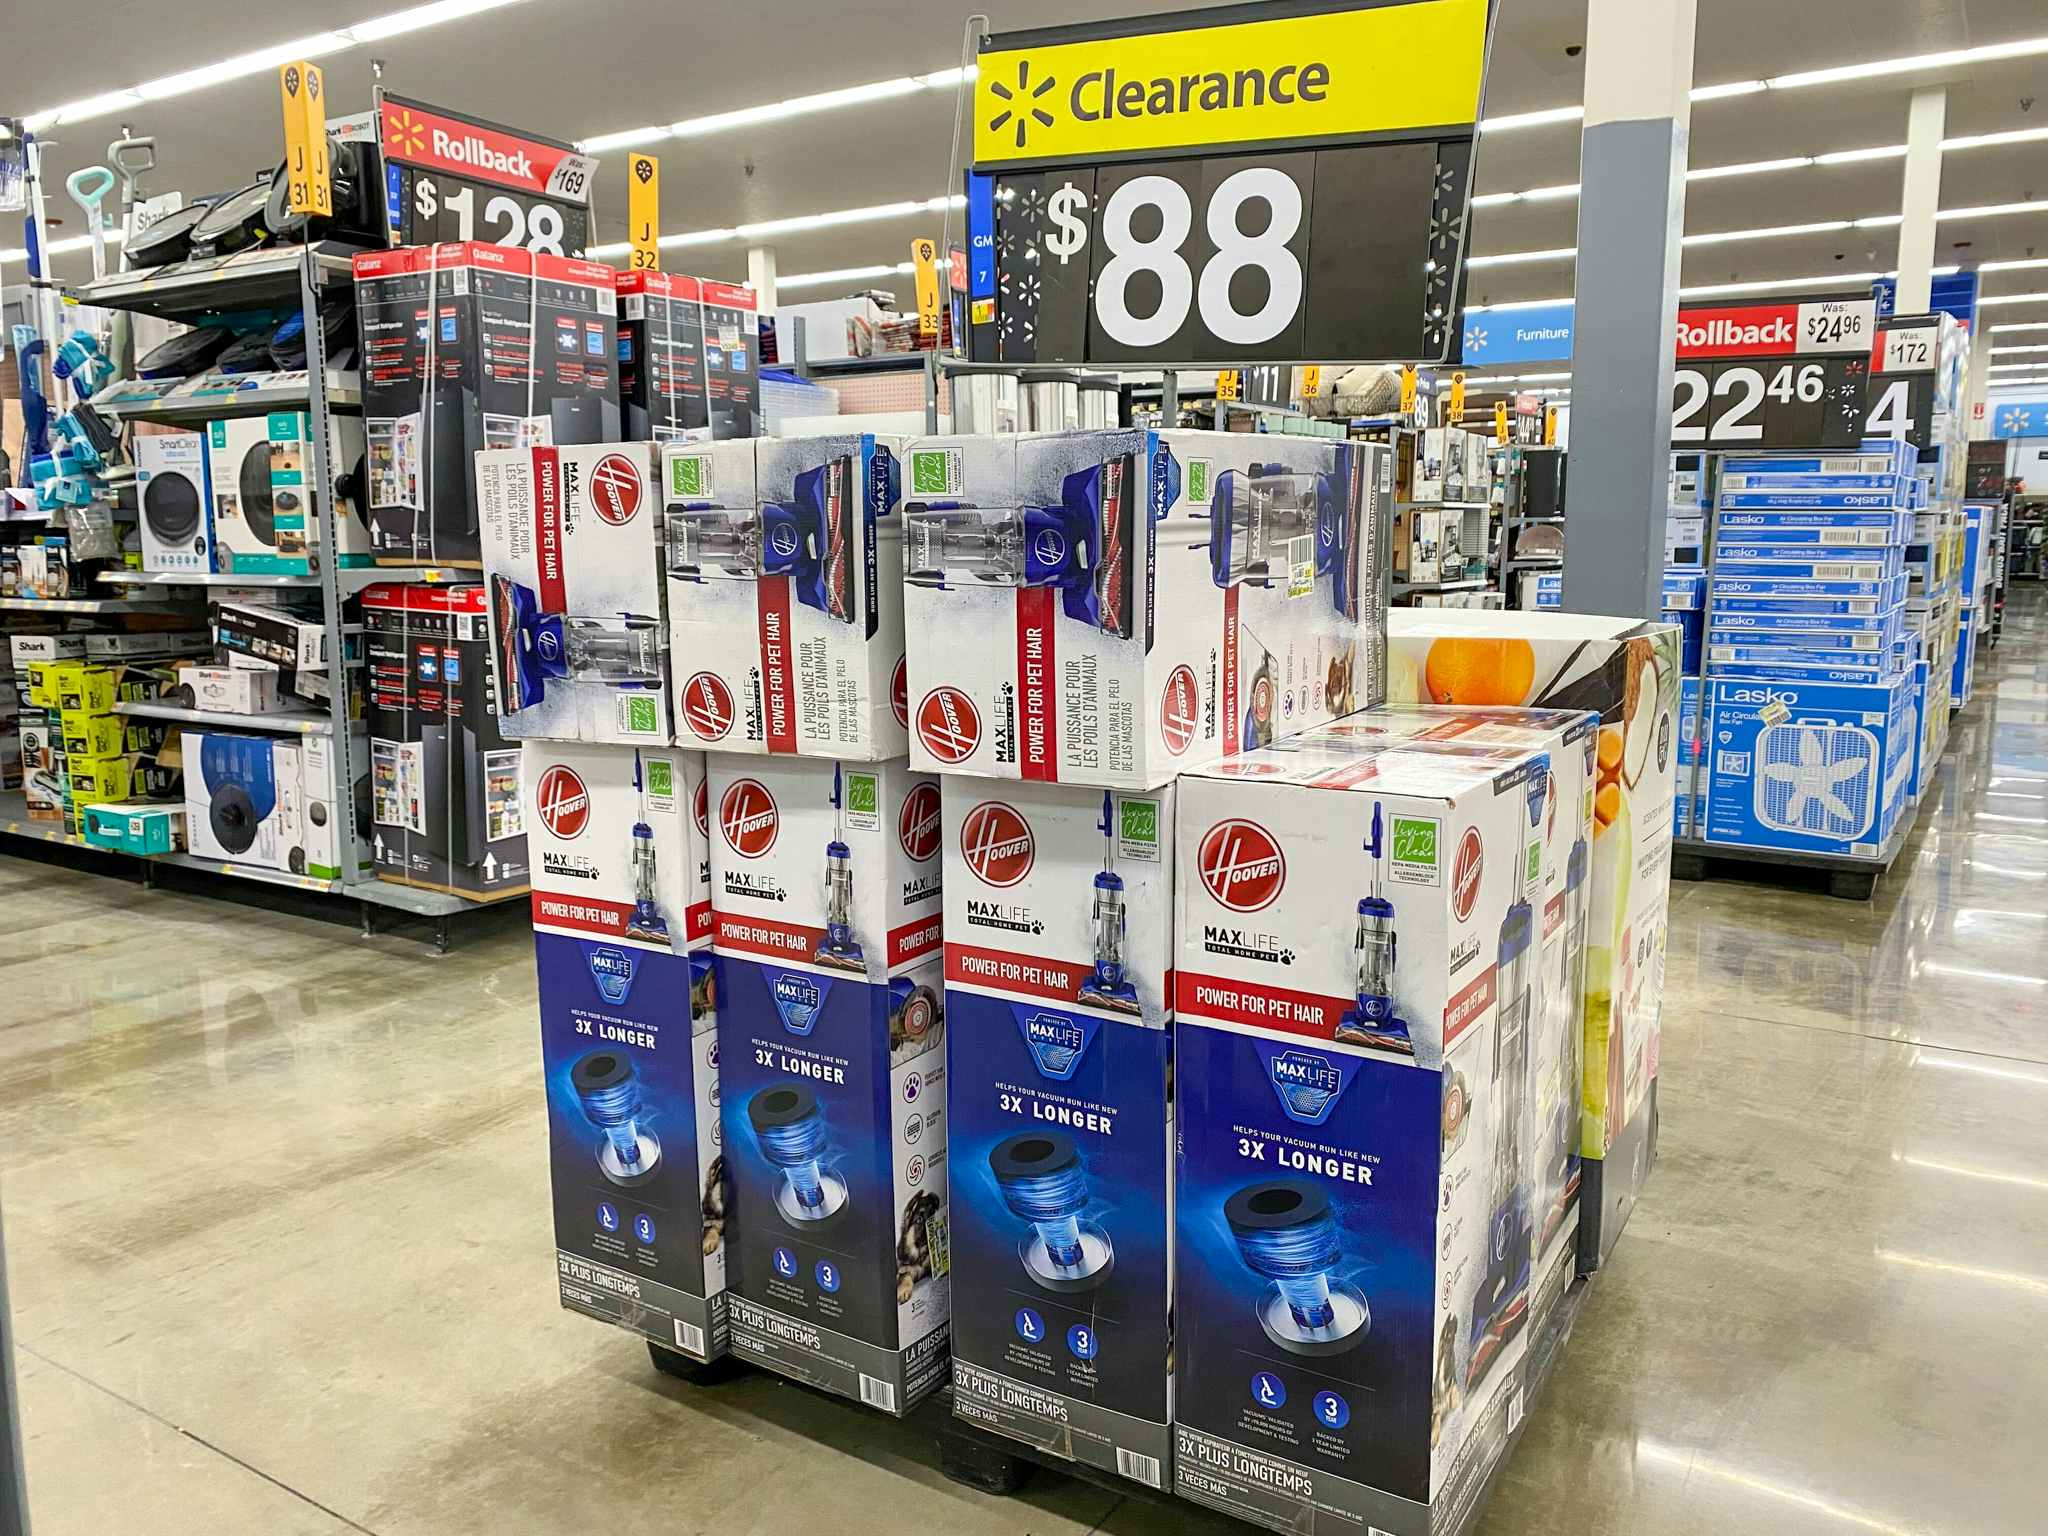 Hoover Total Home Pet Max Vacuum Cleaners on display at Walmart. Yellow clearance sign above display says $88.